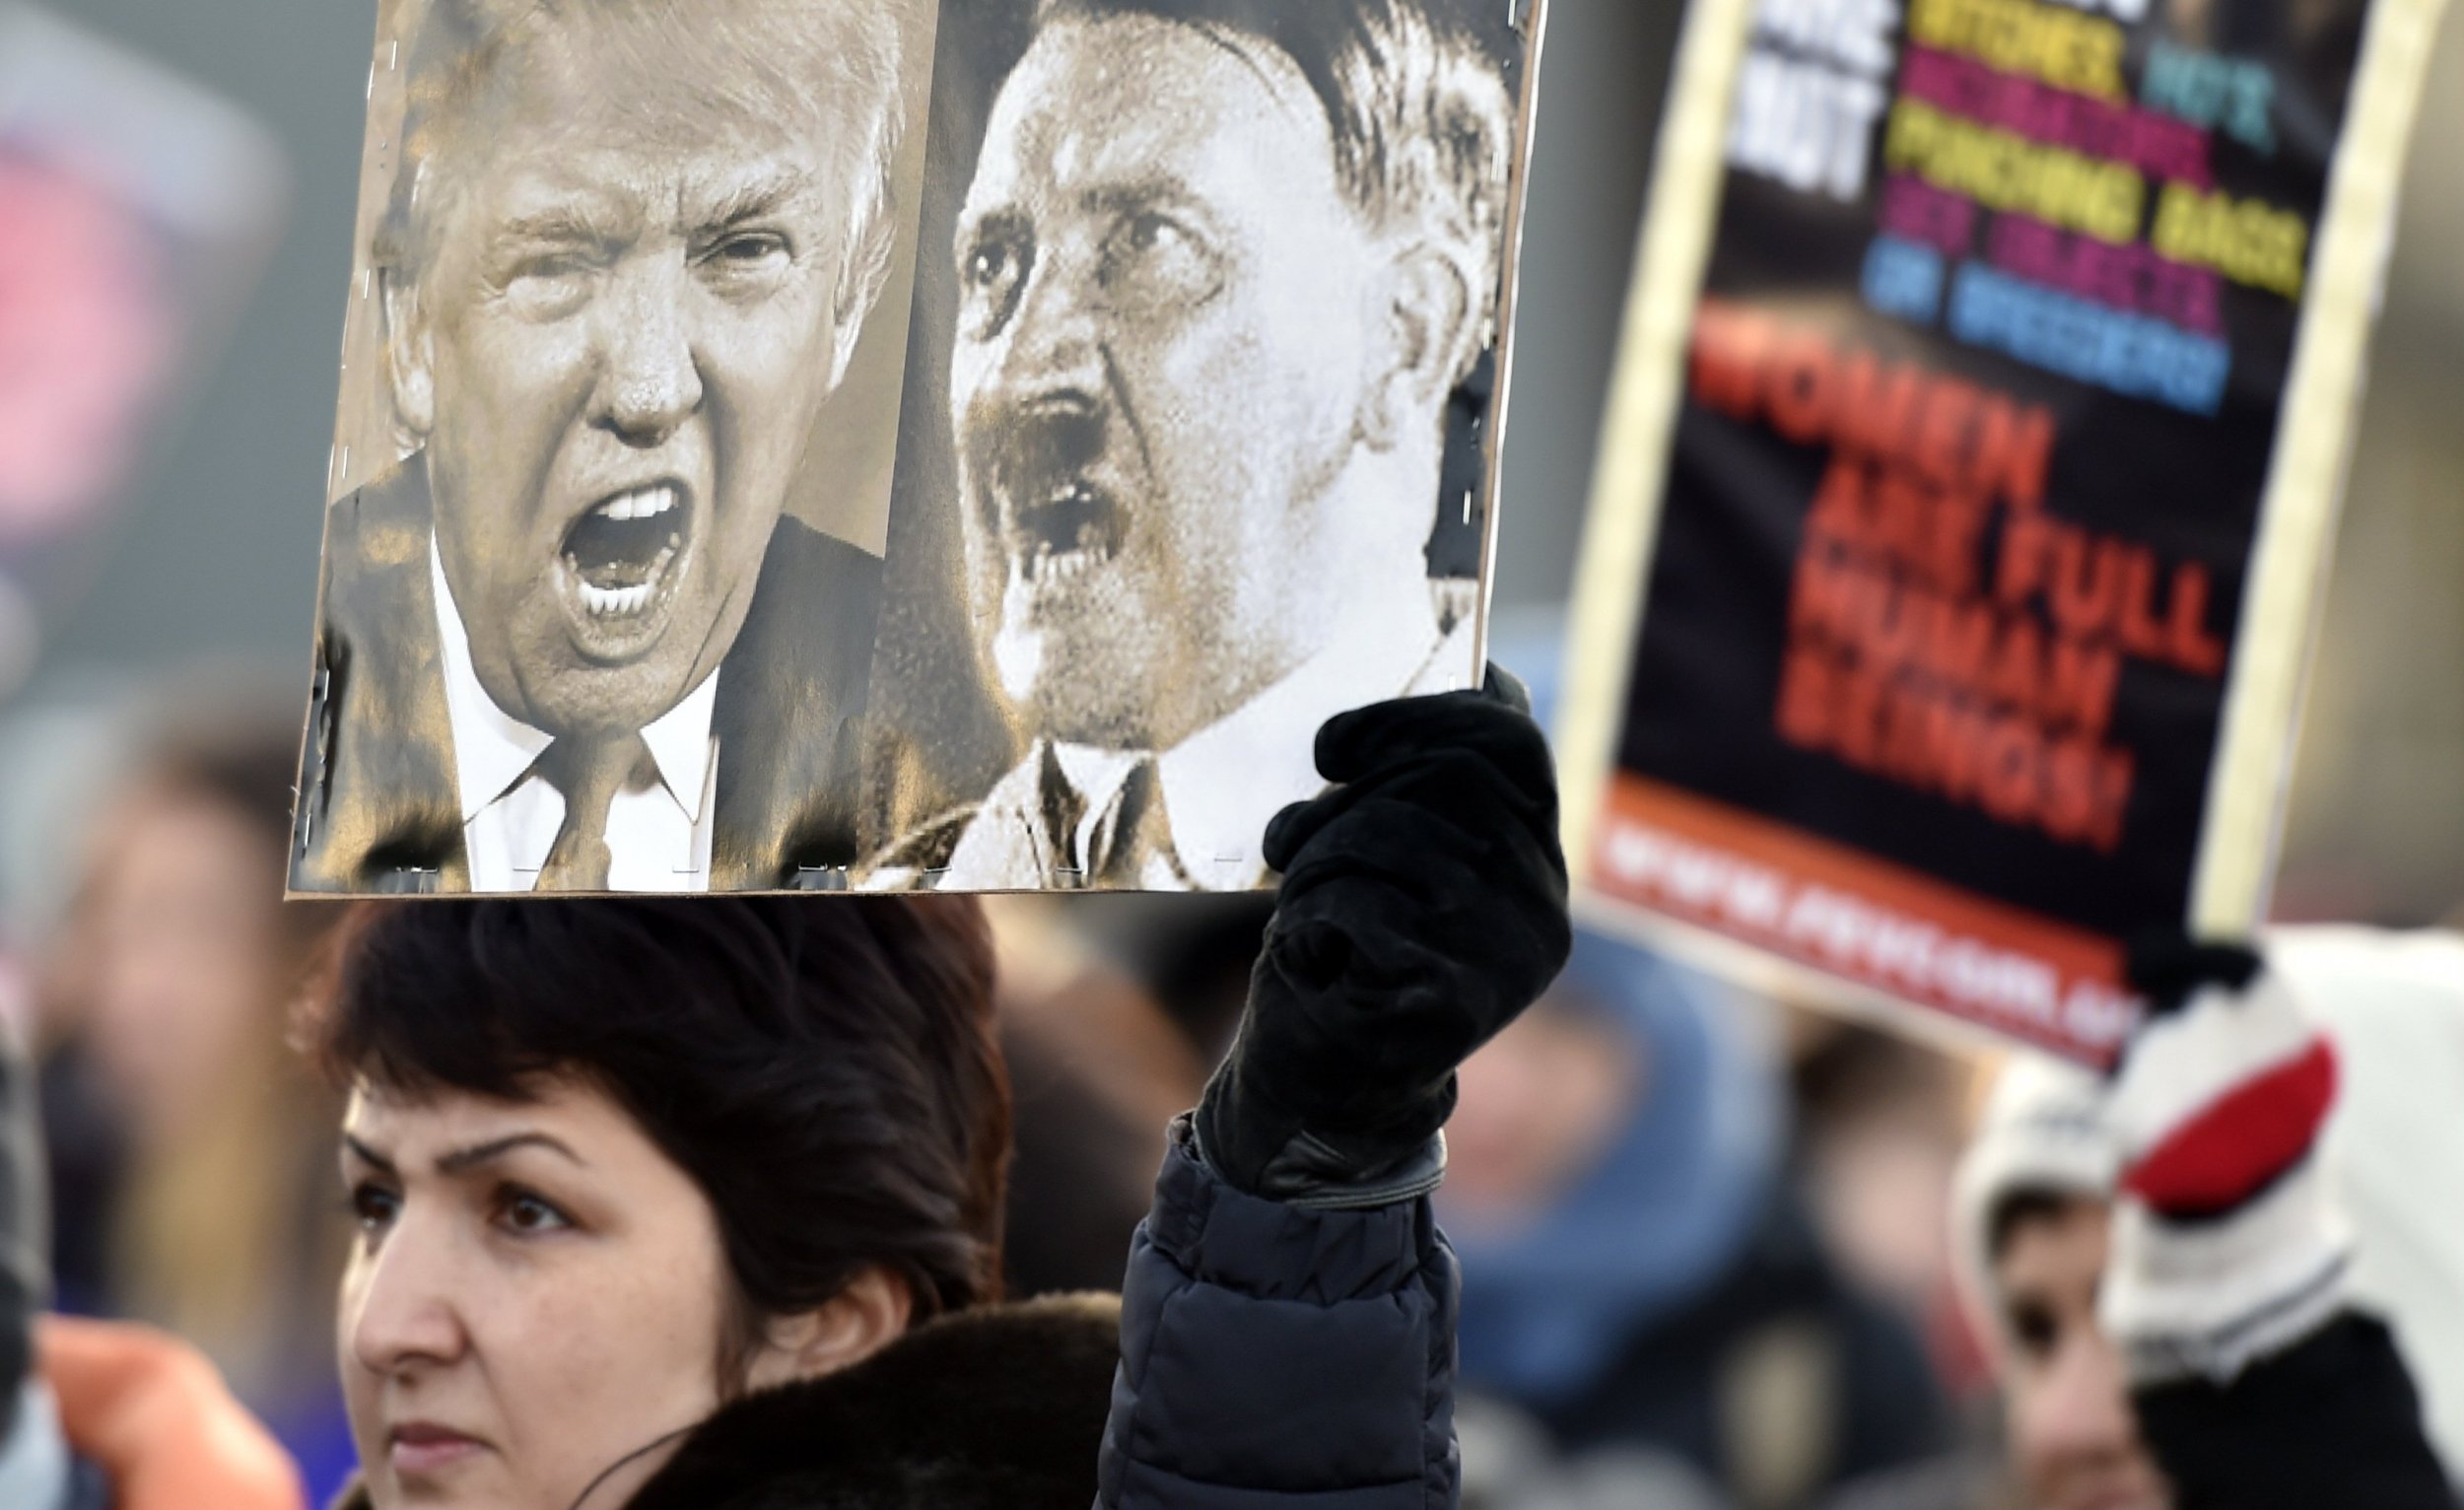 Trump Meets Every Criteria for an Authoritarian Leader, Harvard Political Scientists Warn